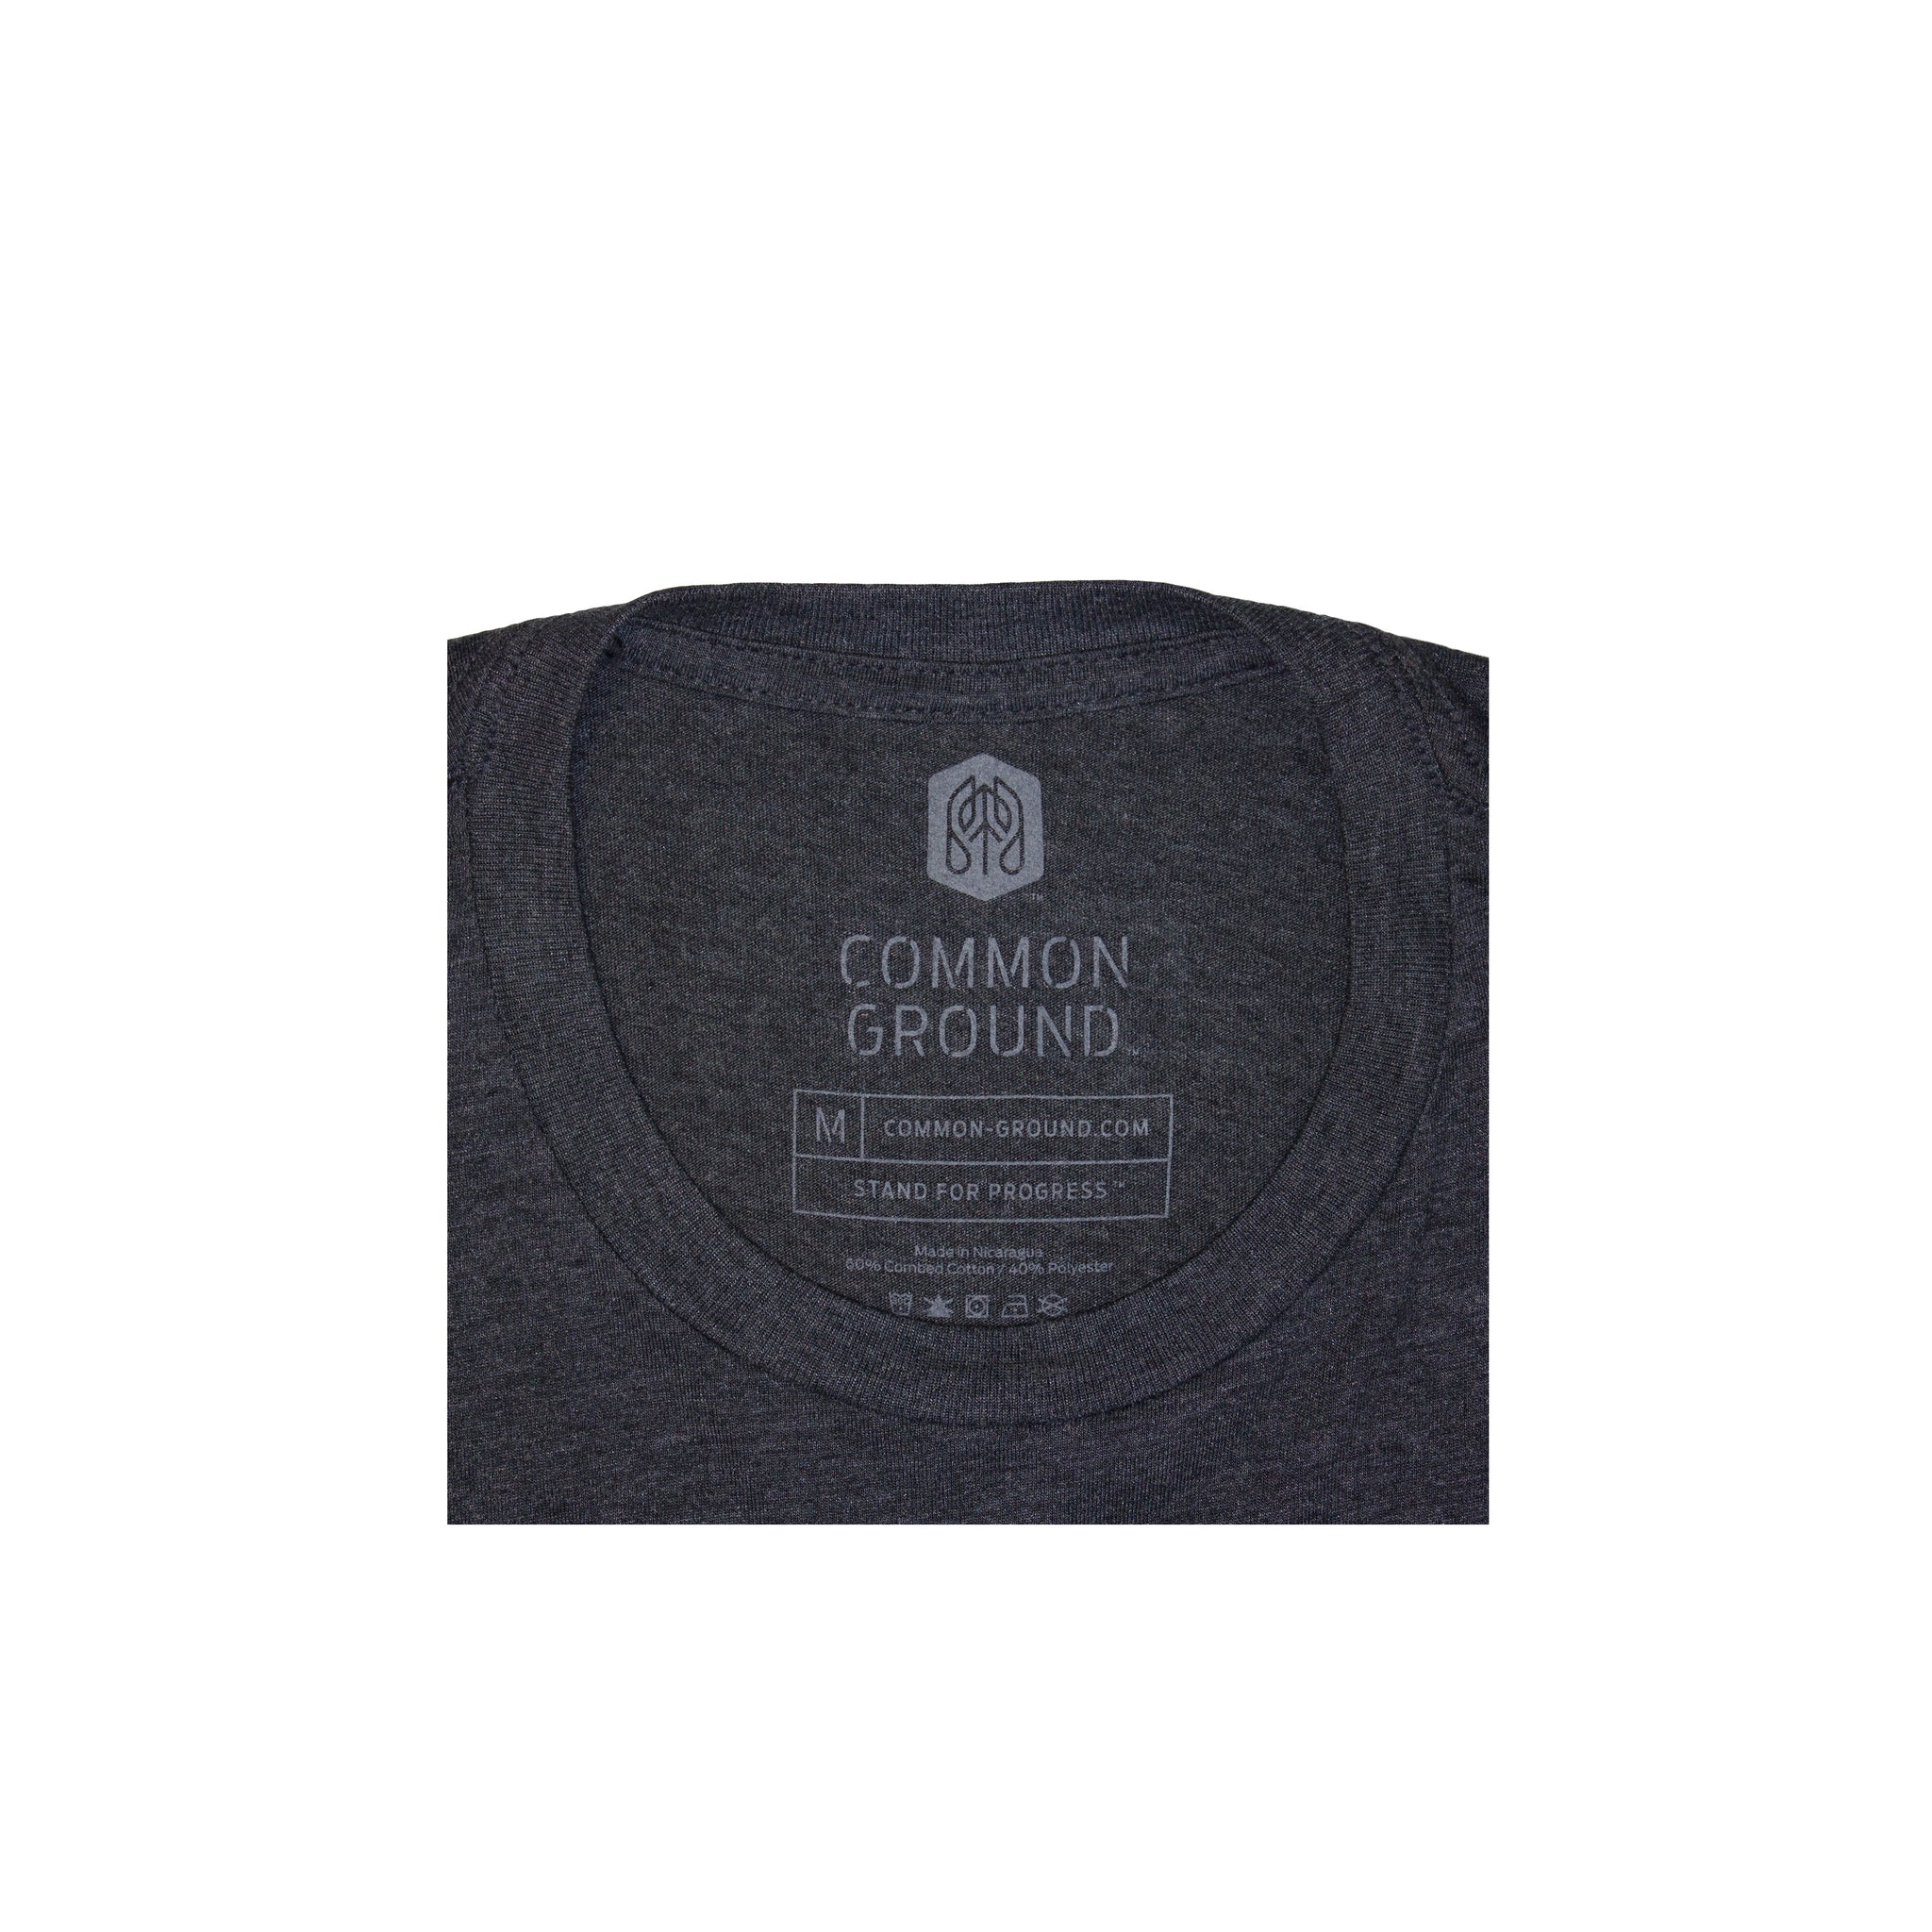 Charcoal -  Common Ground Badge T shirt Neck Tag View